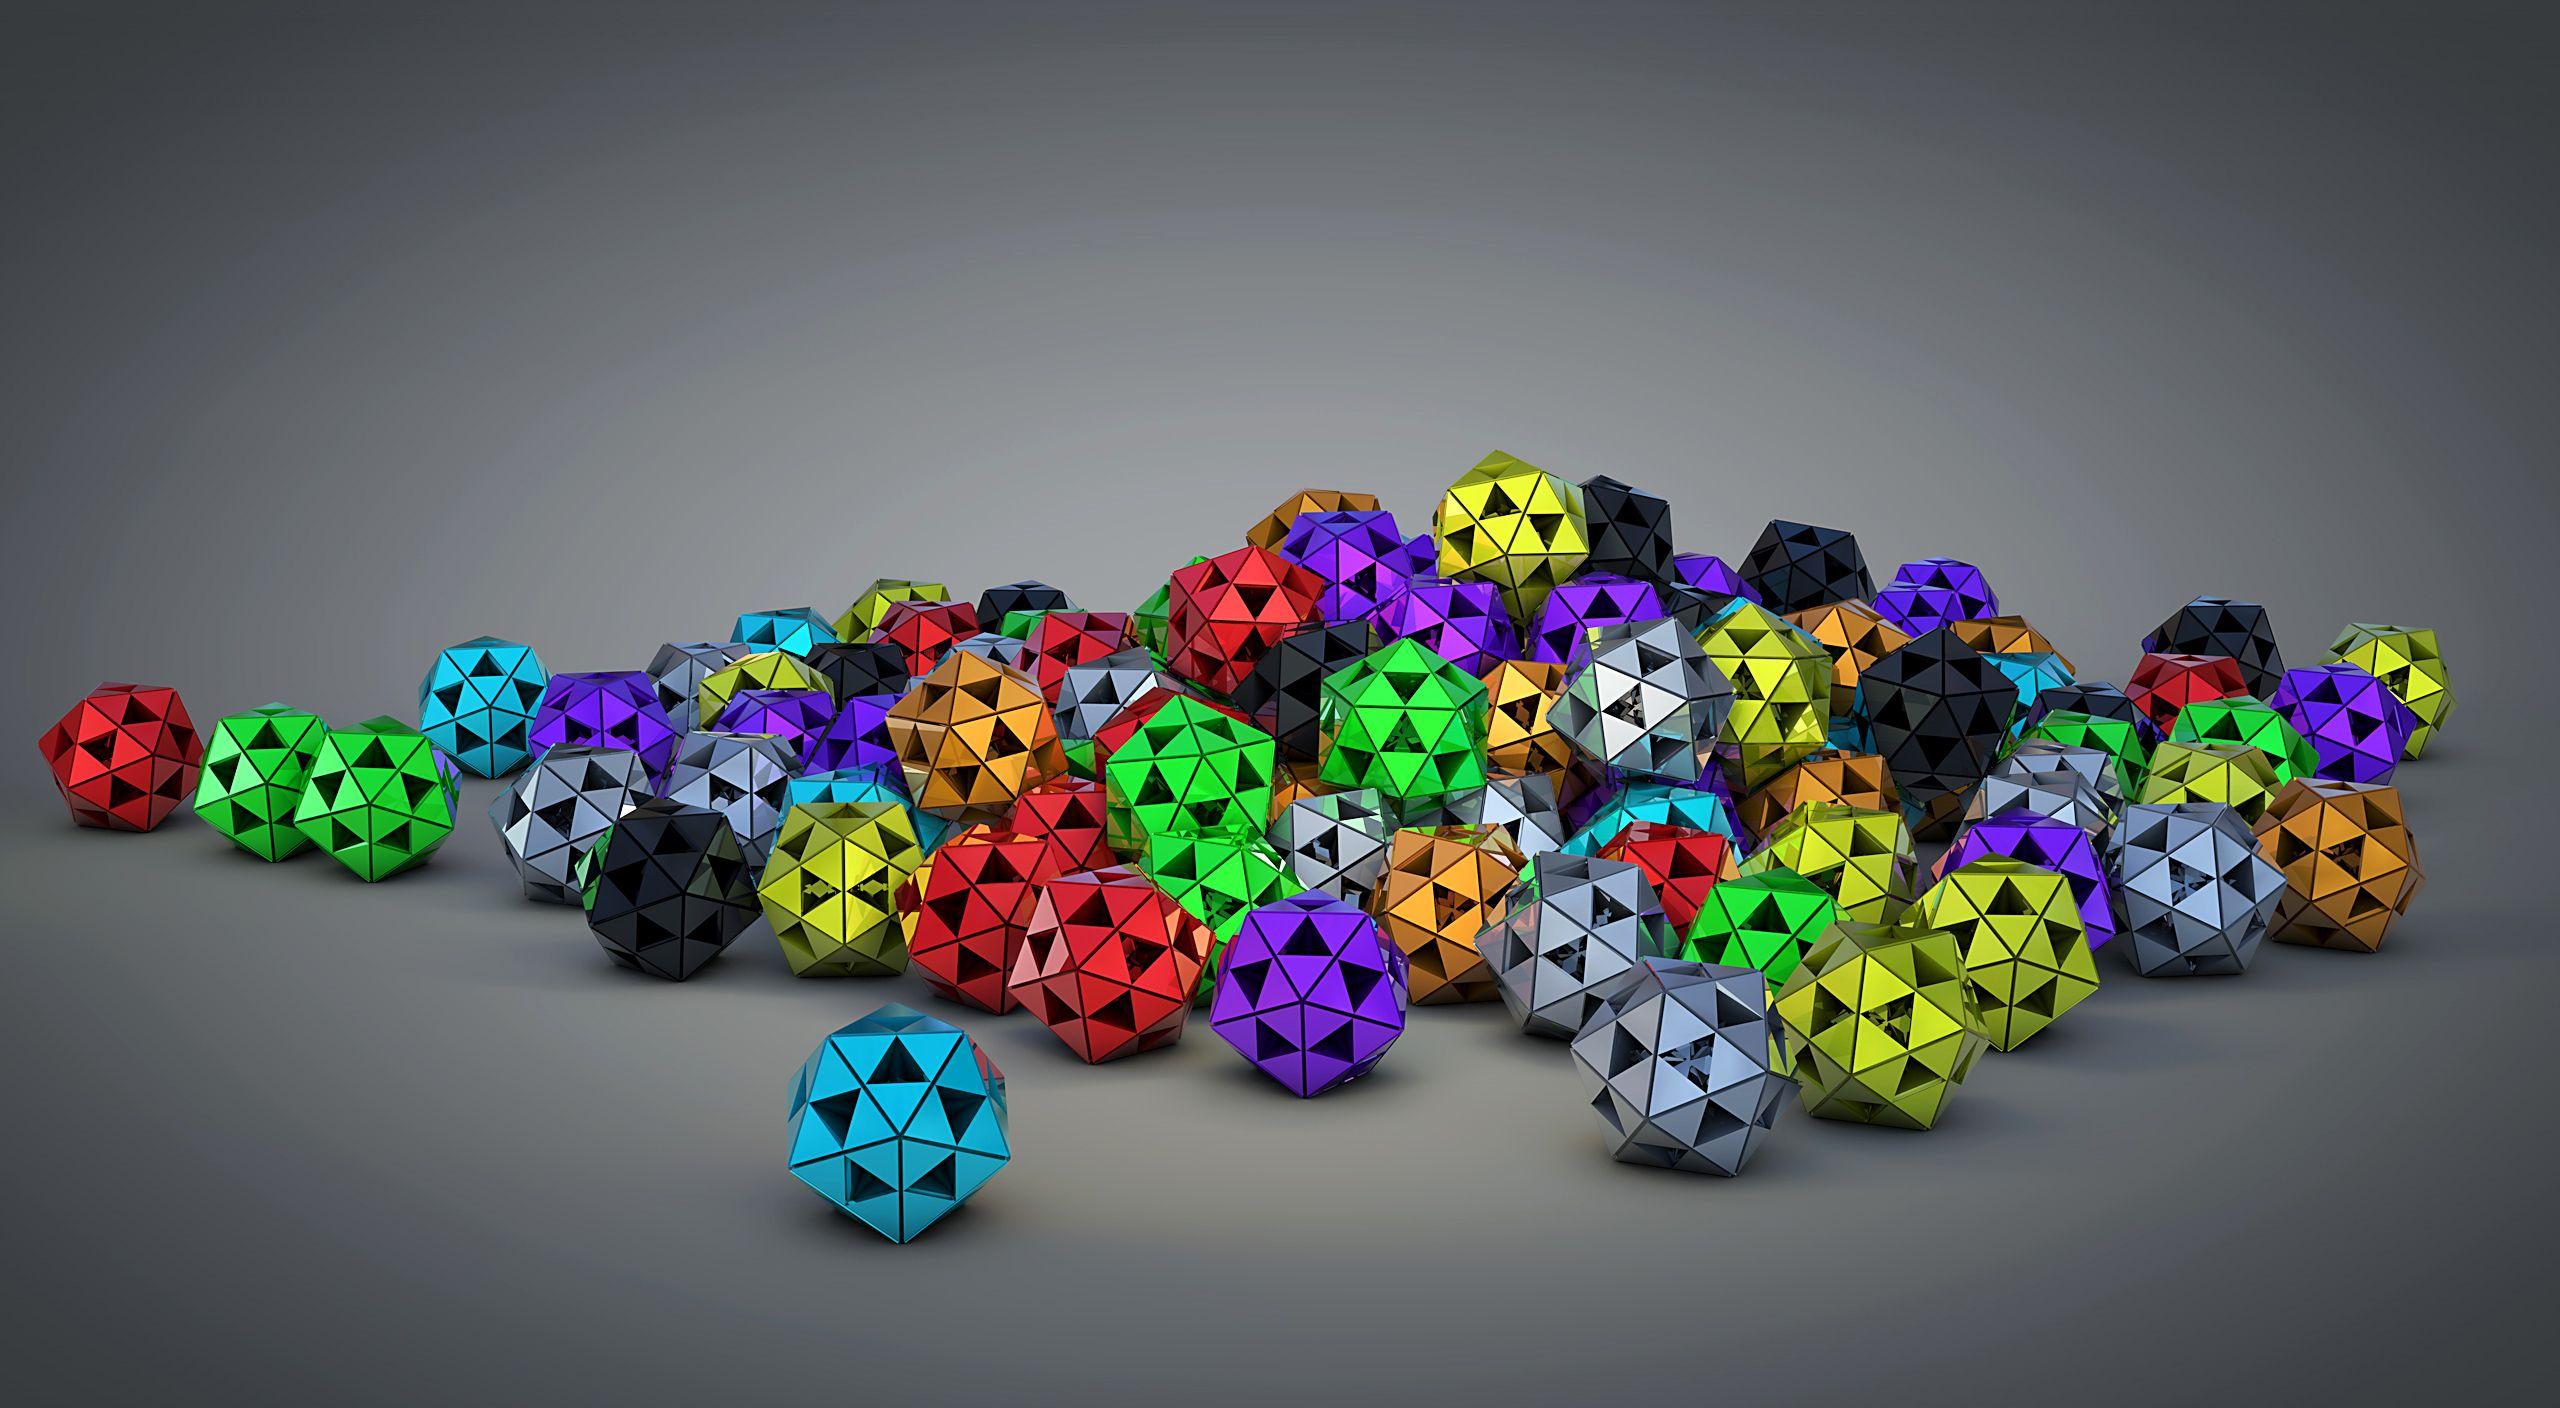 Ball and Blue Triangle Logo - Wallpaper : green, yellow, blue, triangle, ball, ART, color, flower ...